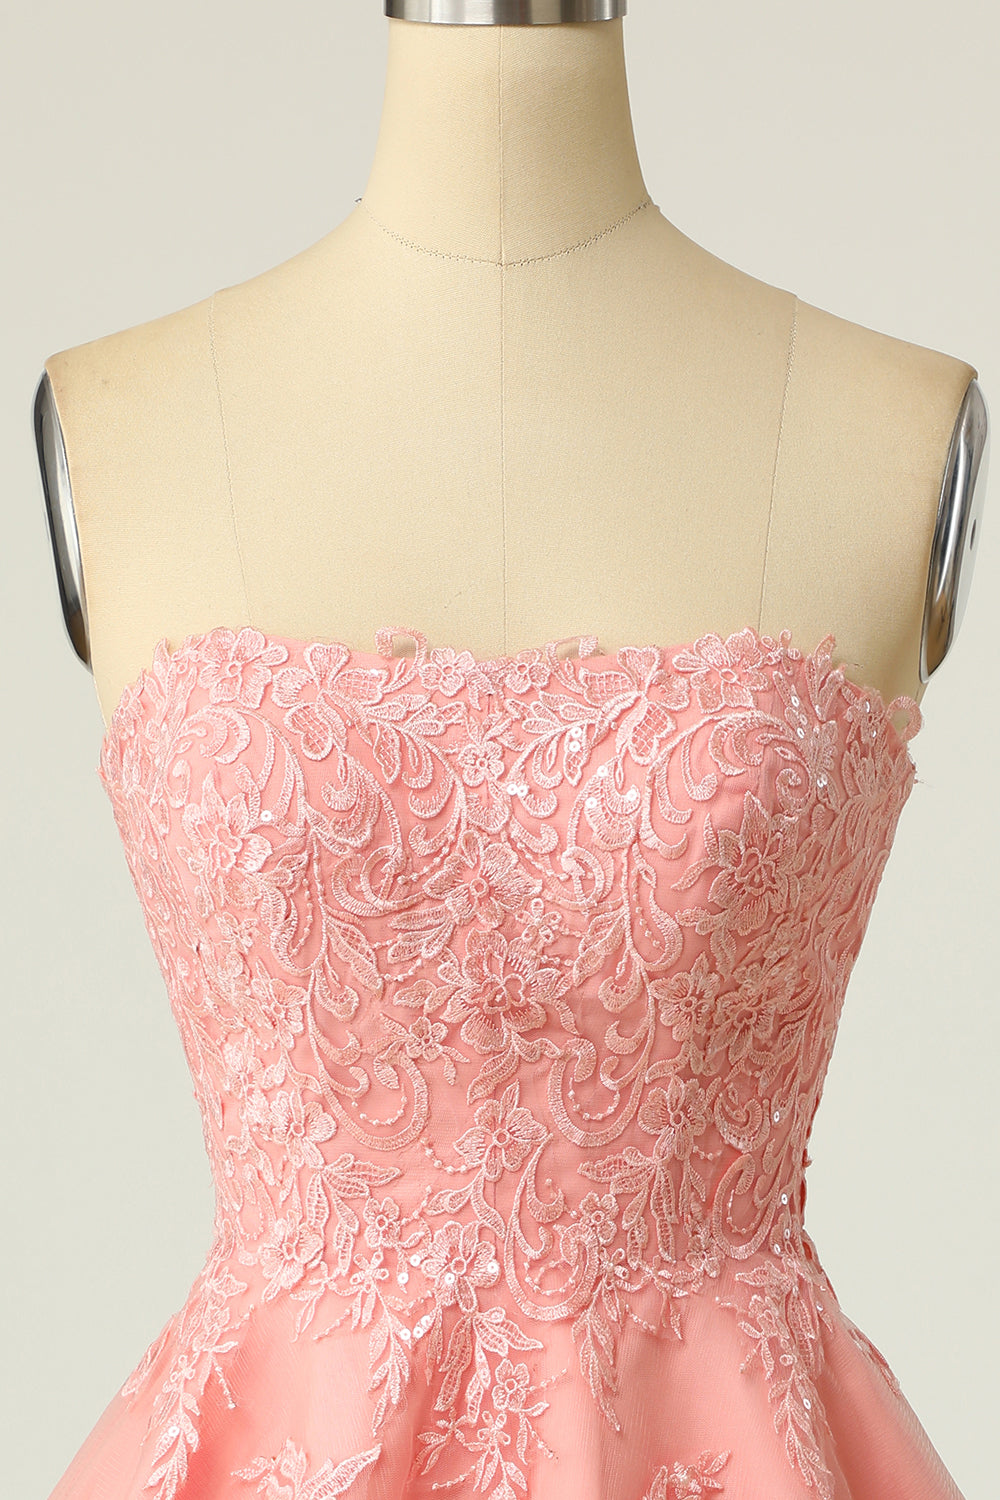 Blush Strapless Short Homecoming Dress with Appliques